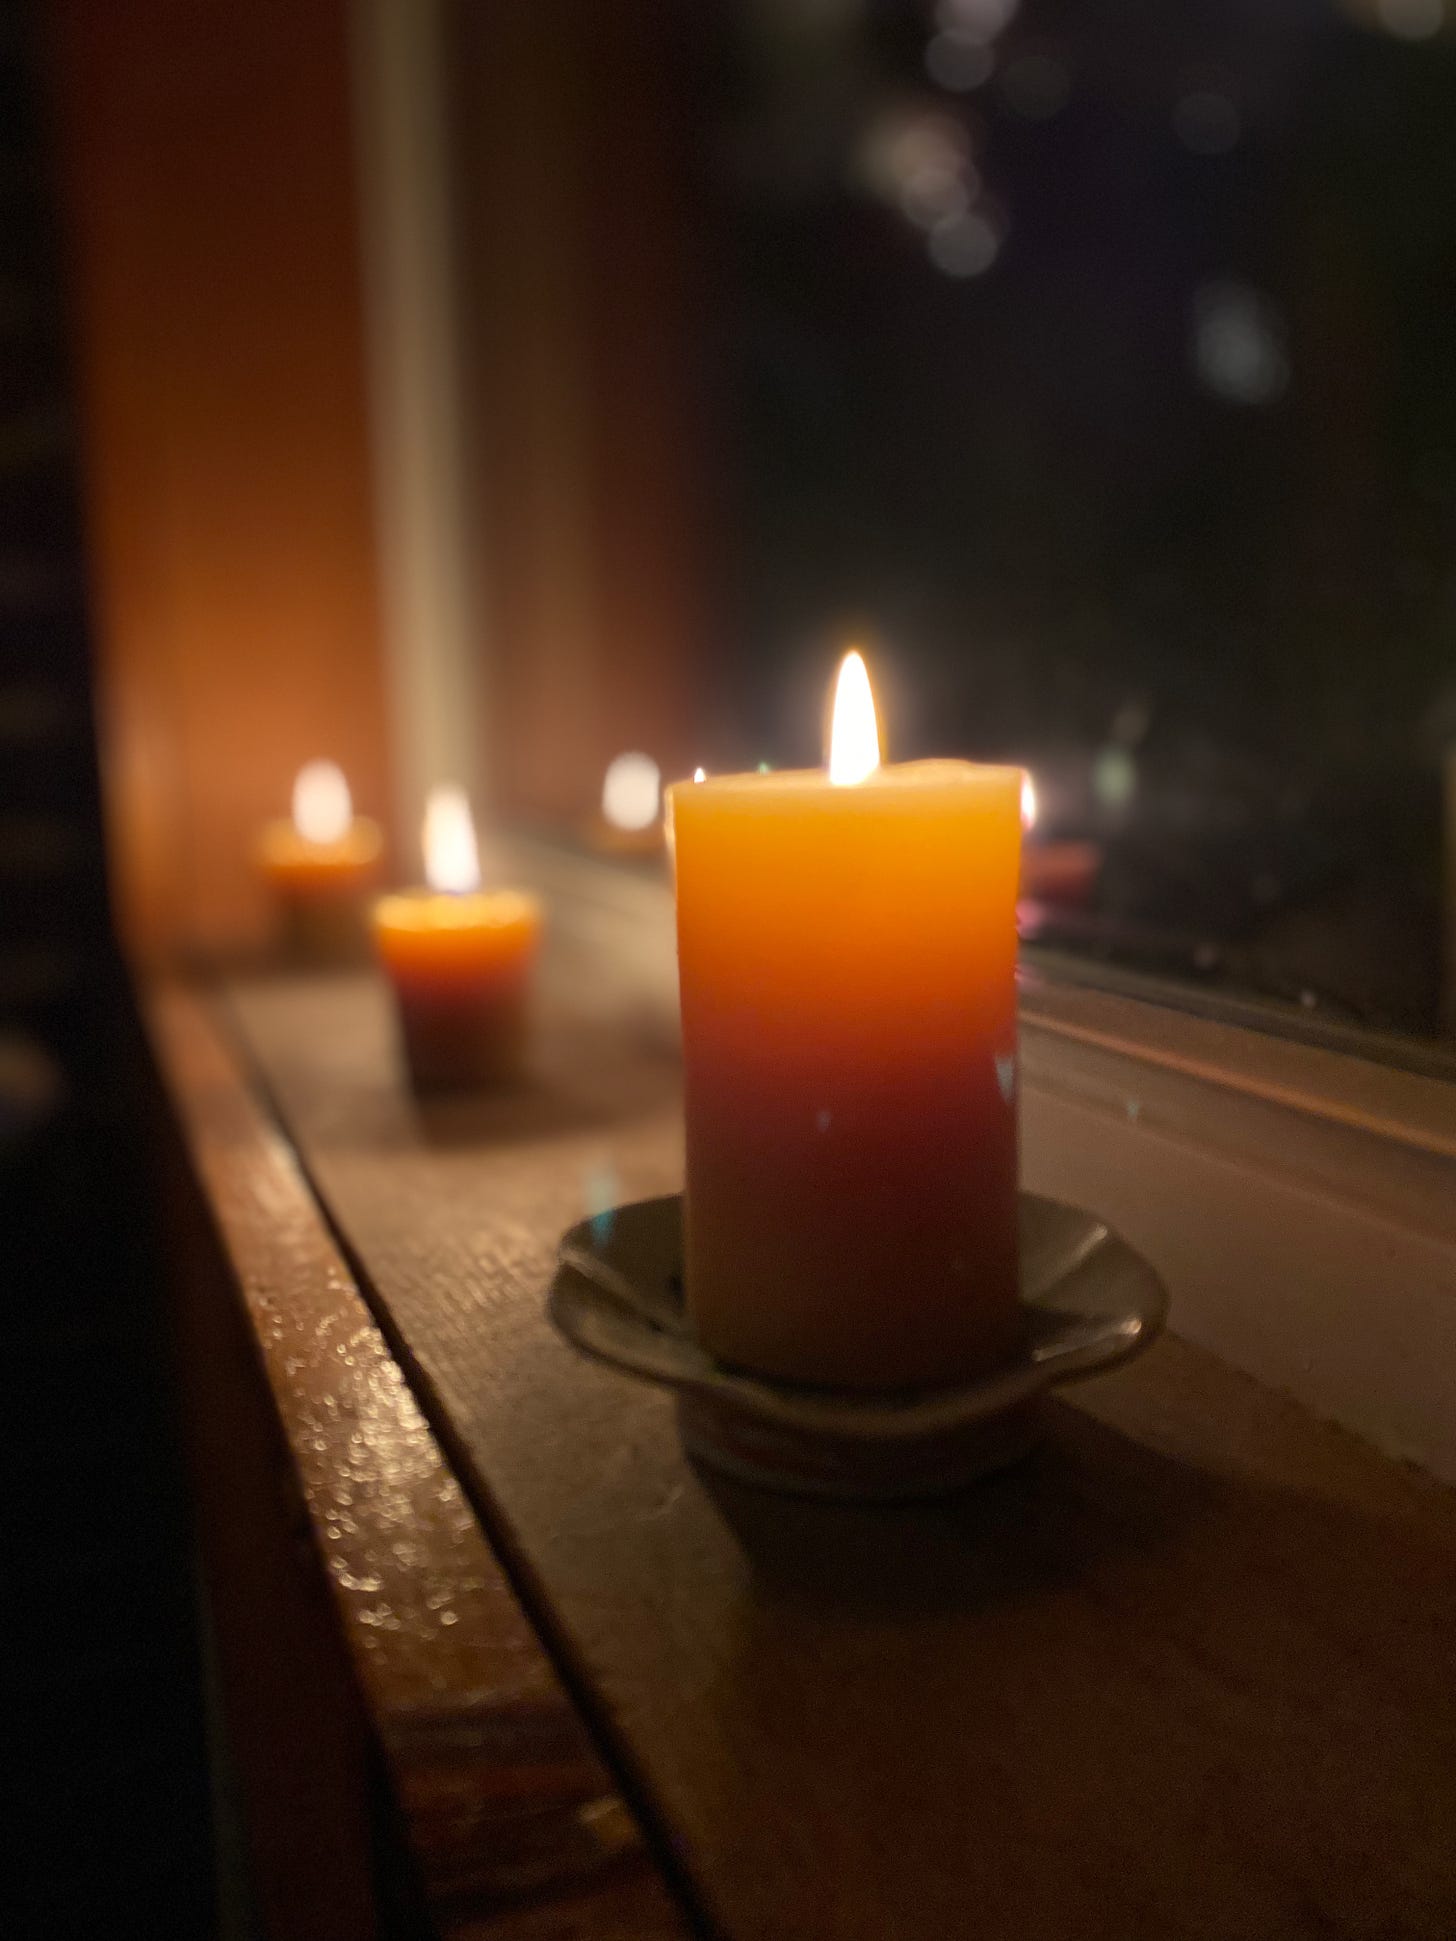 A lit beeswax candle on a windowsill. The window is dark, and several smaller candles, also lit, are blurred out in the background.